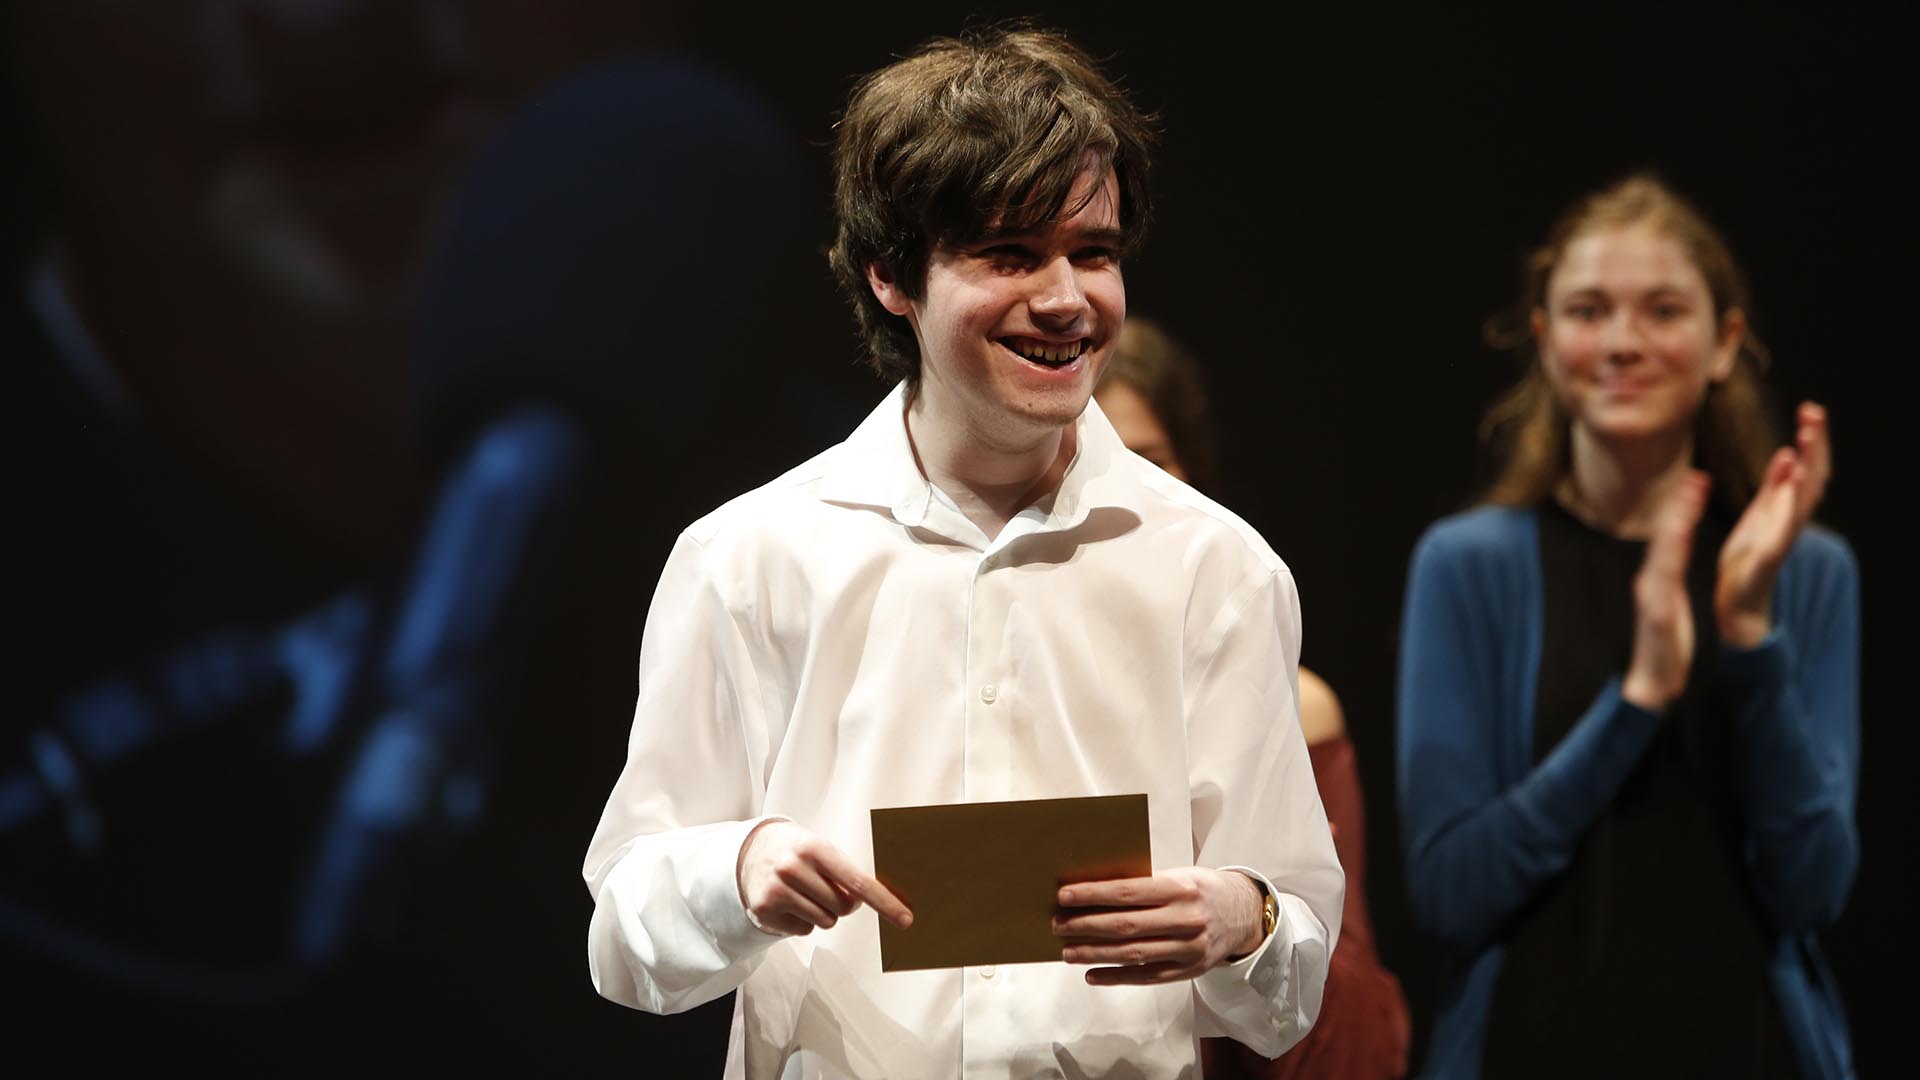 A huge cheer rises as Maxime Vallée-Girard is named the 2017 National Champion for the French Stream. Maxime attends Collège Durocher Saint-Lambert in St-Lambert, QC. He wins $5,000 and $1,000 for his school’s library.